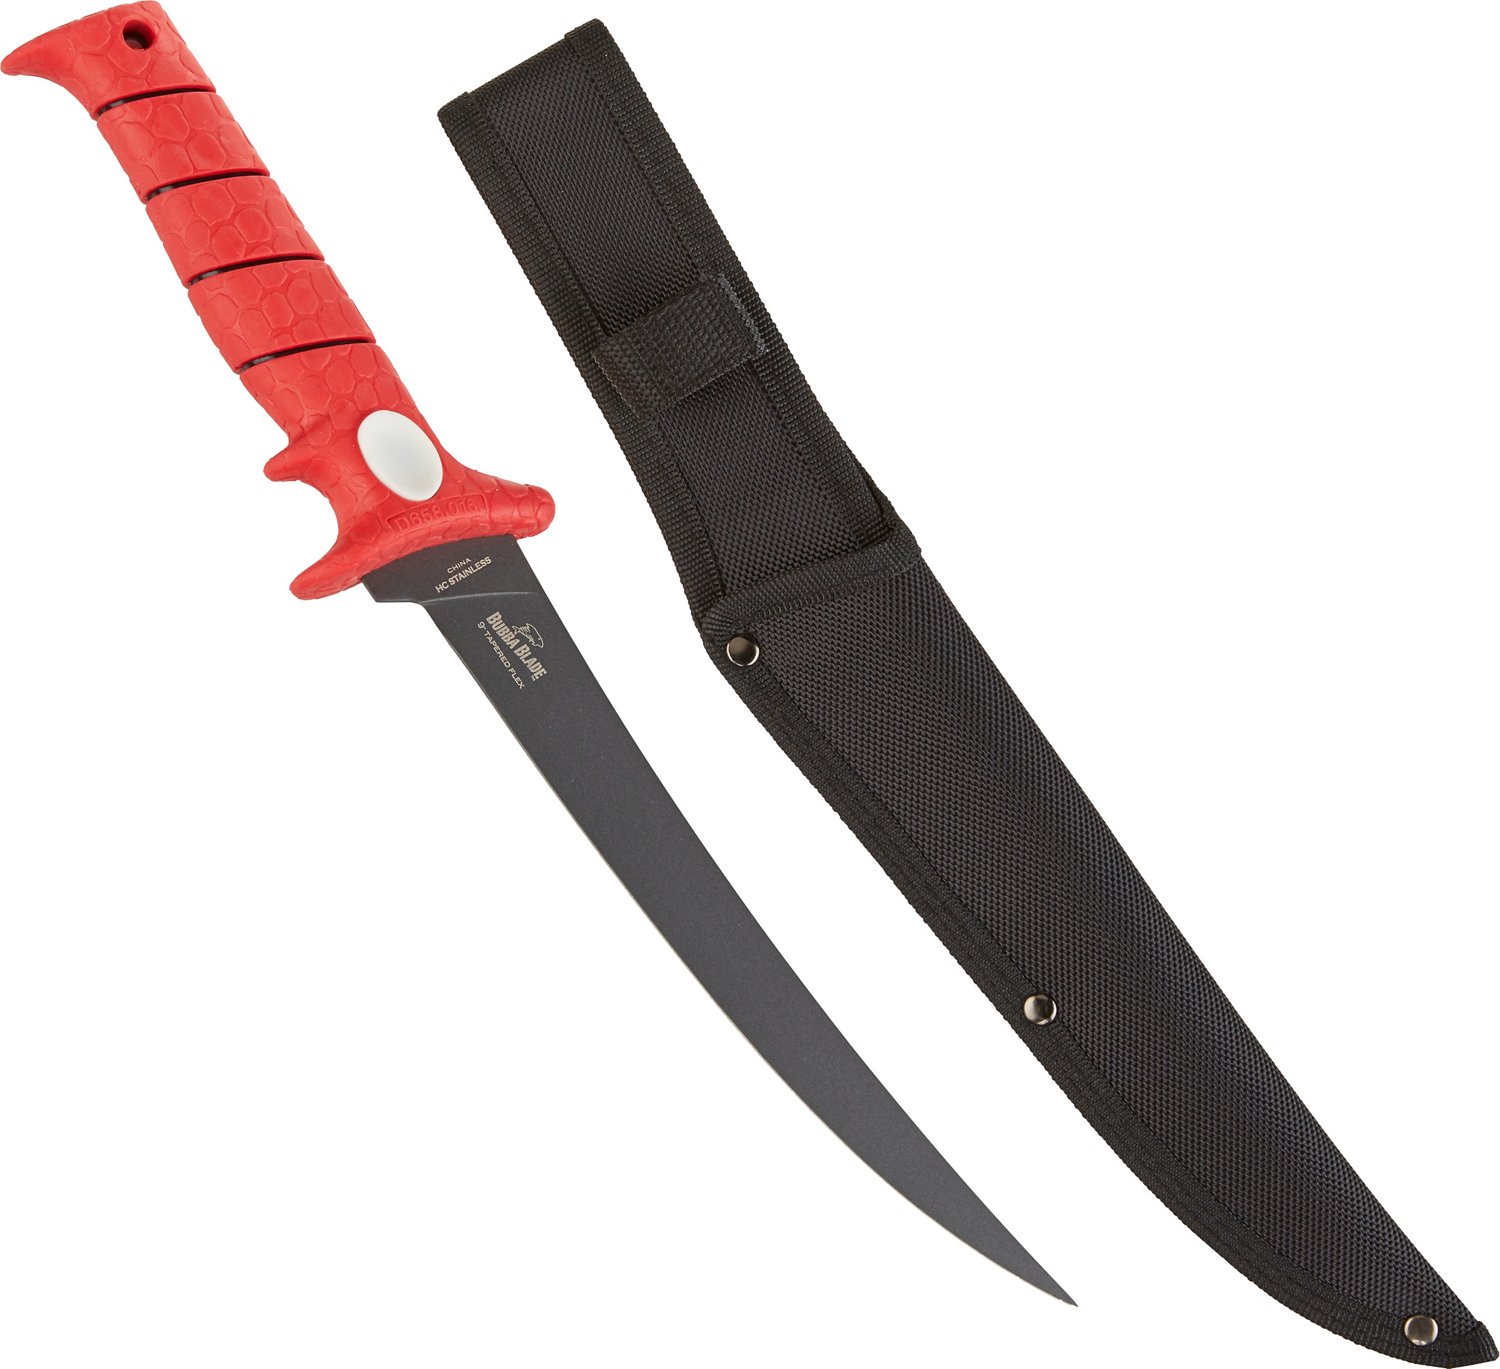 Bubba 9 in Tapered Flex Fillet Knife